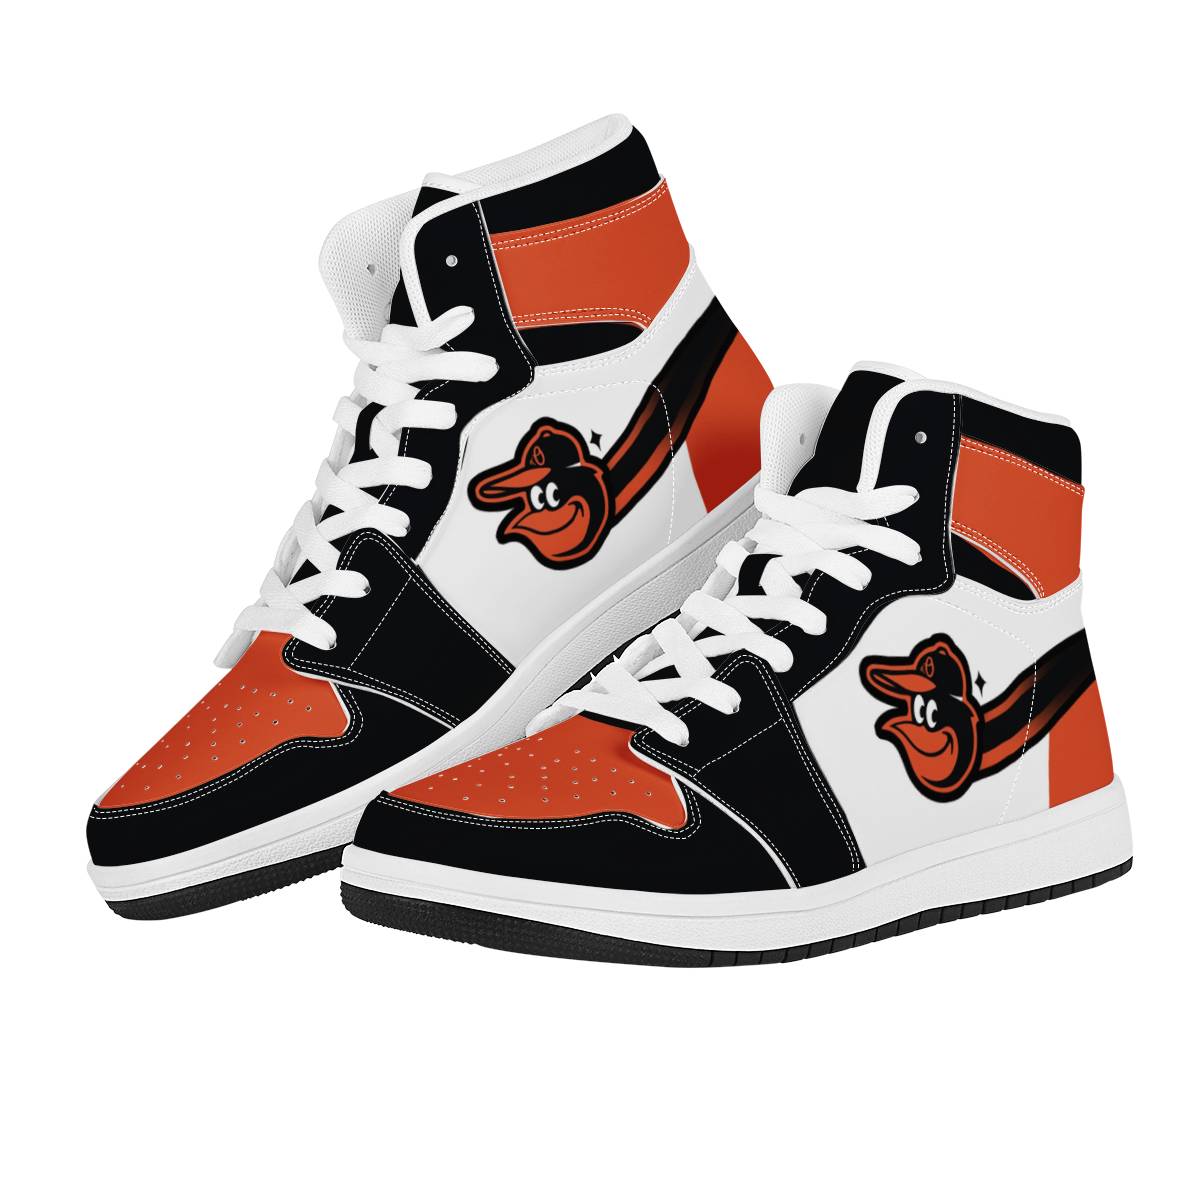 Women's Baltimore Orioles High Top Leather AJ1 Sneakers 002